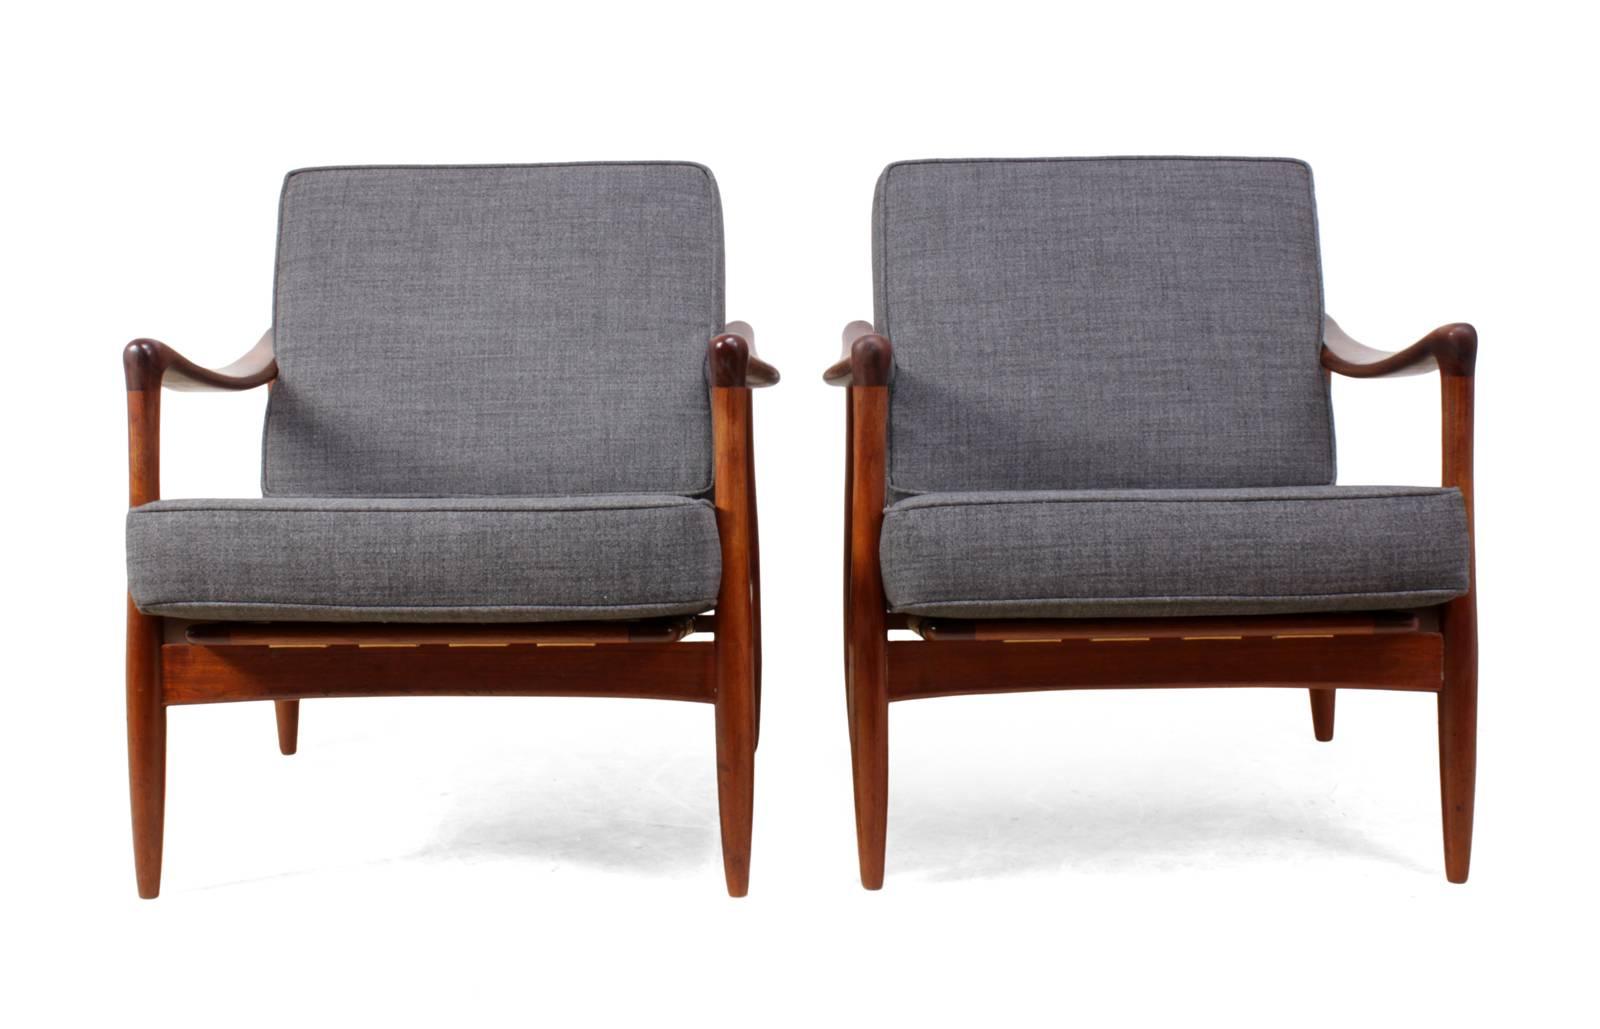 Pair of Danish Teak Armchairs
This pair of danish mid century armchairs were produced in the early 1960's they are in excellent original condition the cushions are new and have been upholstered in charcoal grey 100% wool the frames are solid with no